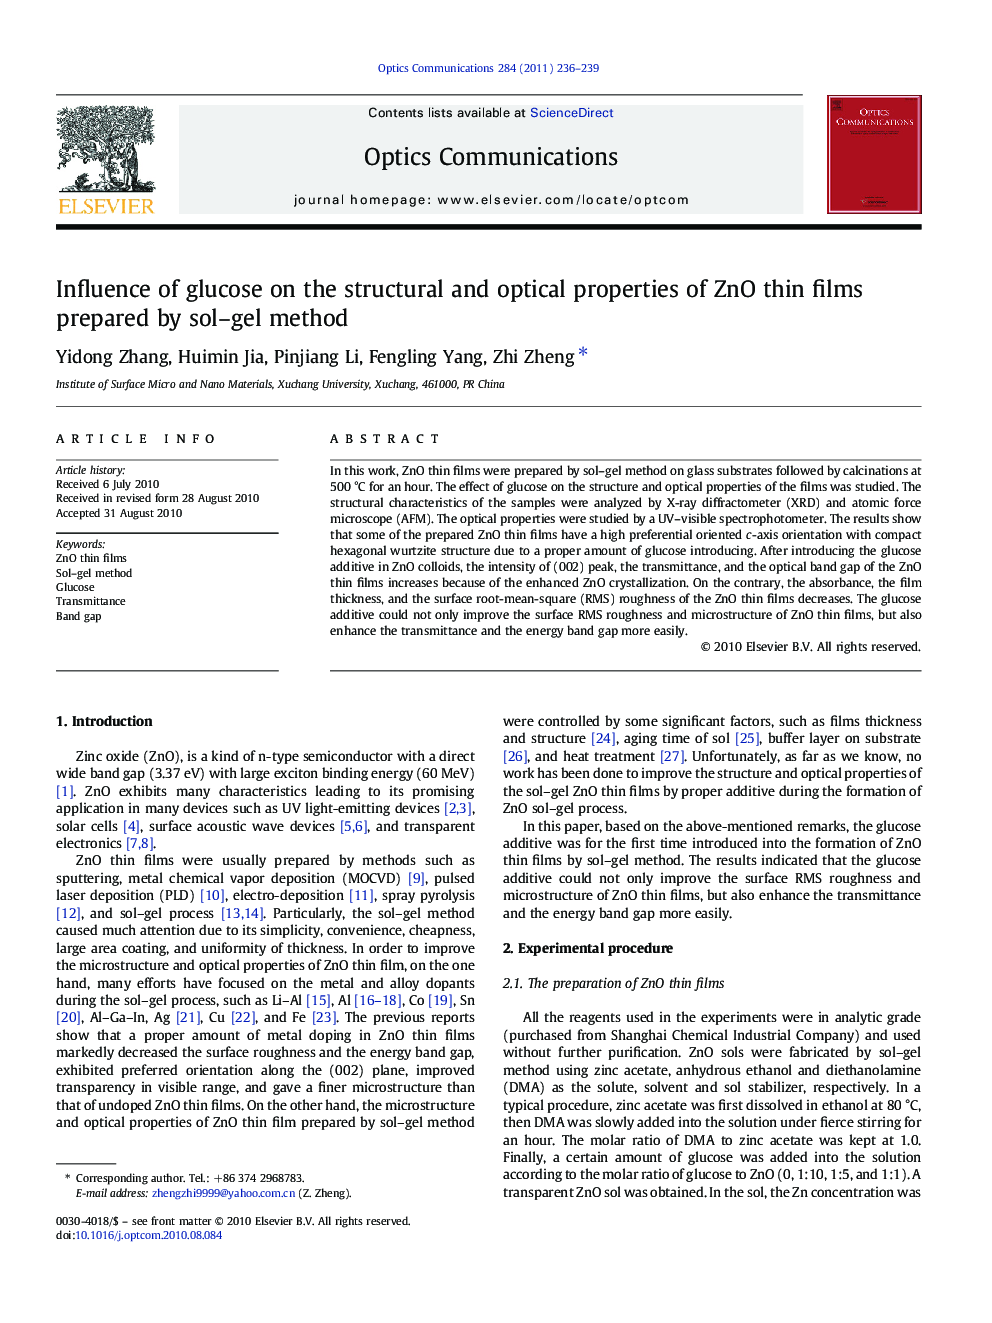 Influence of glucose on the structural and optical properties of ZnO thin films prepared by sol–gel method